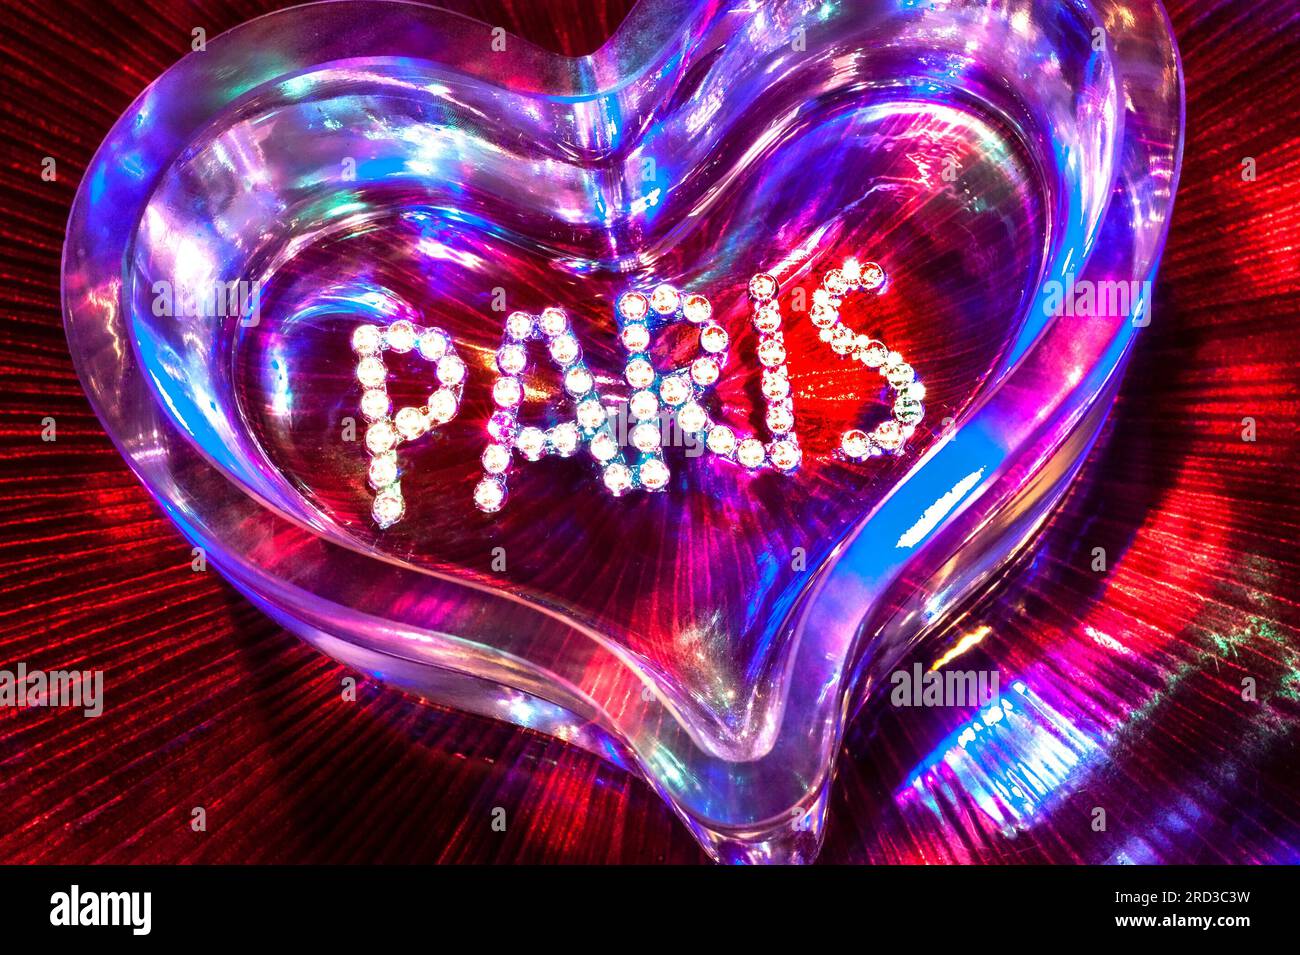 PARIS LOVE FUN NIGHT CONCEPT NIGHTCLUB NIGHTLIFE MONTMARTRE PIGALLE SHOWTIME CABARET CLUB diamonds crystal glass heart with mixed colour lighting in fun clubbing party theatre disco show French concept Paris France Stock Photo